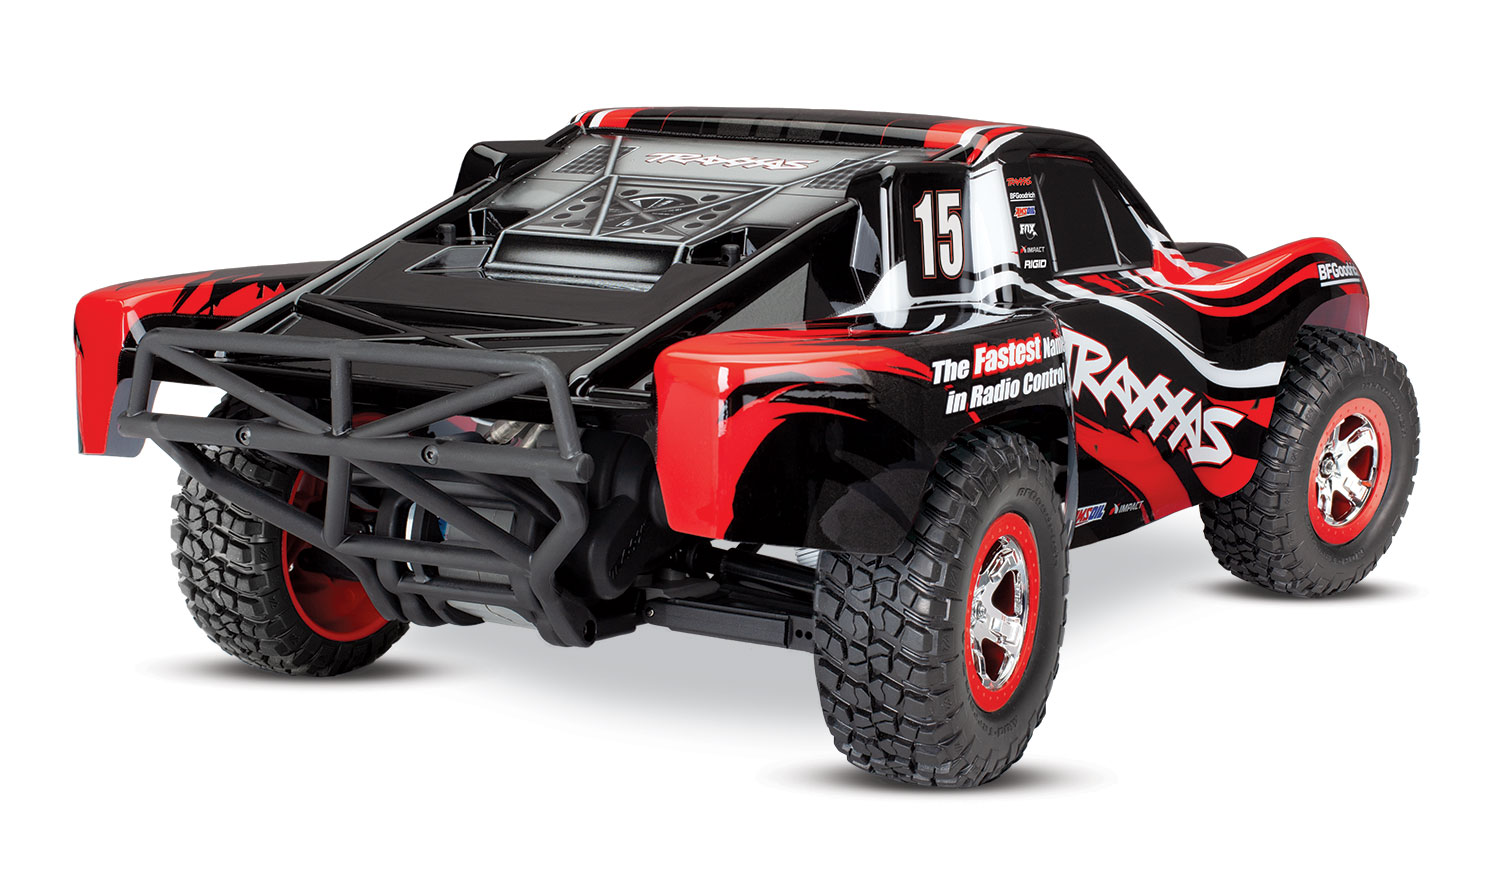 TRAXXAS SLASH - 4x2 - 1/10 BRUSHED ROUGE - AVEC AQ/CH allume cigare